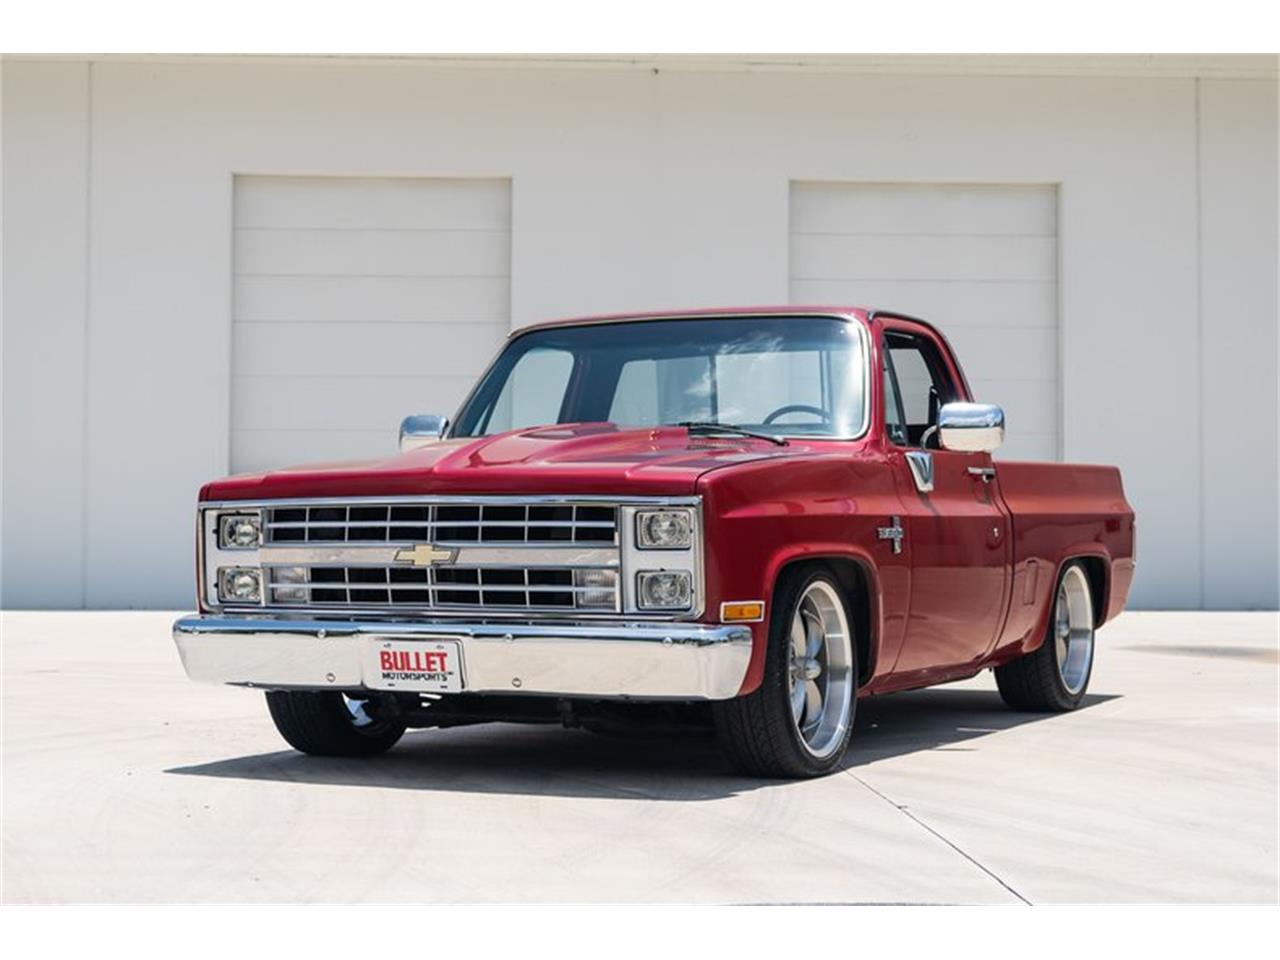 For Sale: 1987 Chevrolet C10 in Fort Lauderdale, Florida for sale in Fort Lauderdale, FL